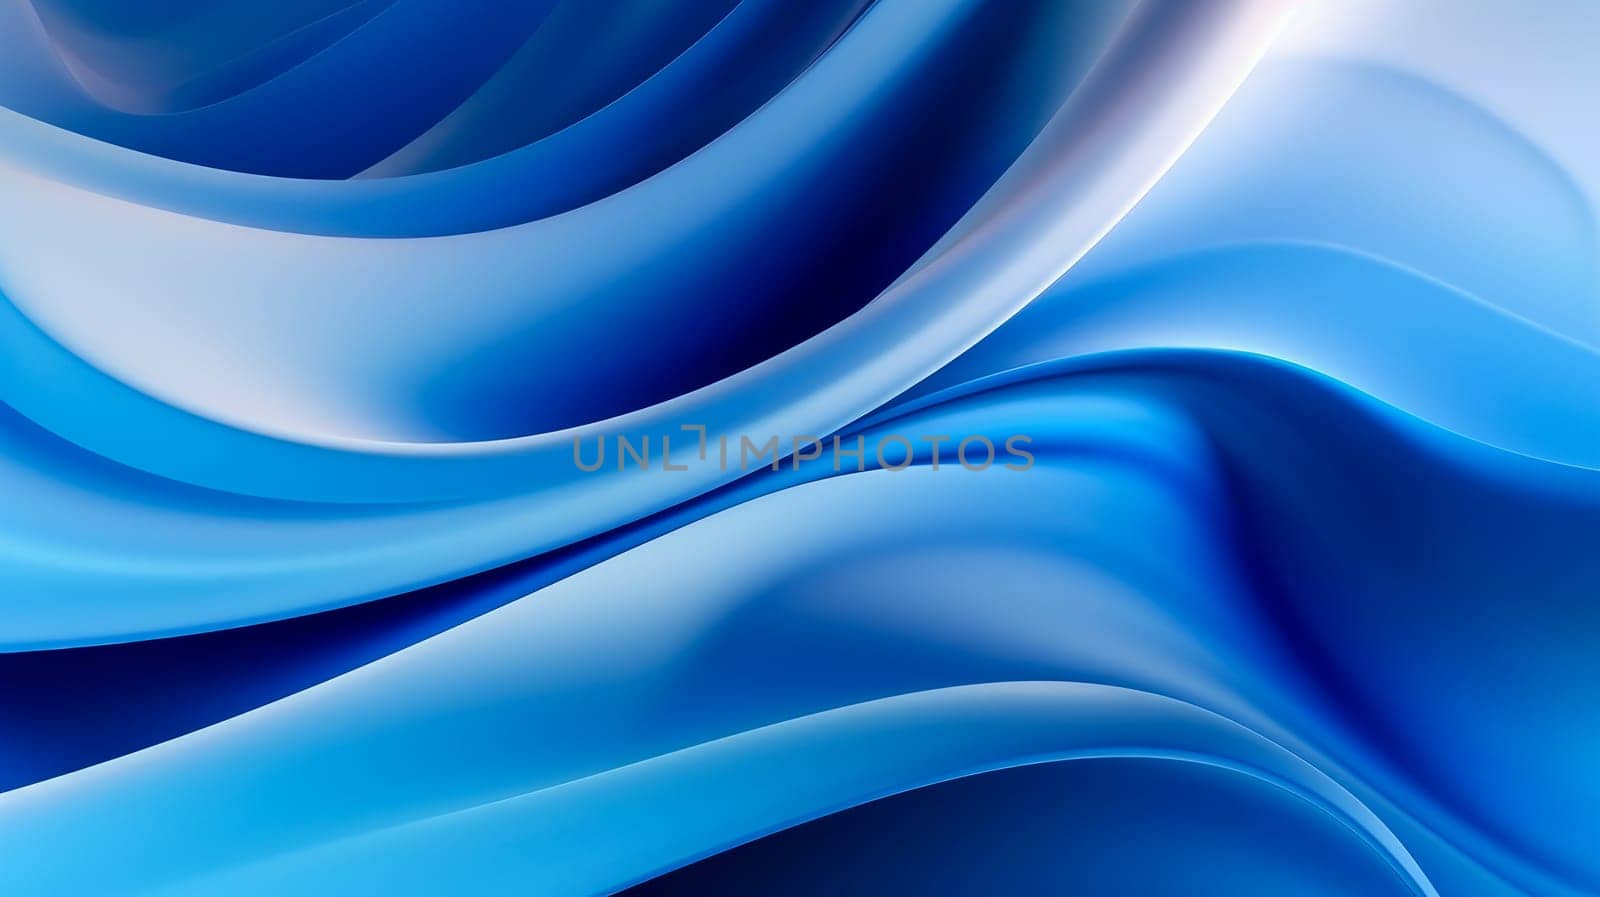 Beautiful luxury 3D modern abstract neon blue background composed of waves with light digital effect